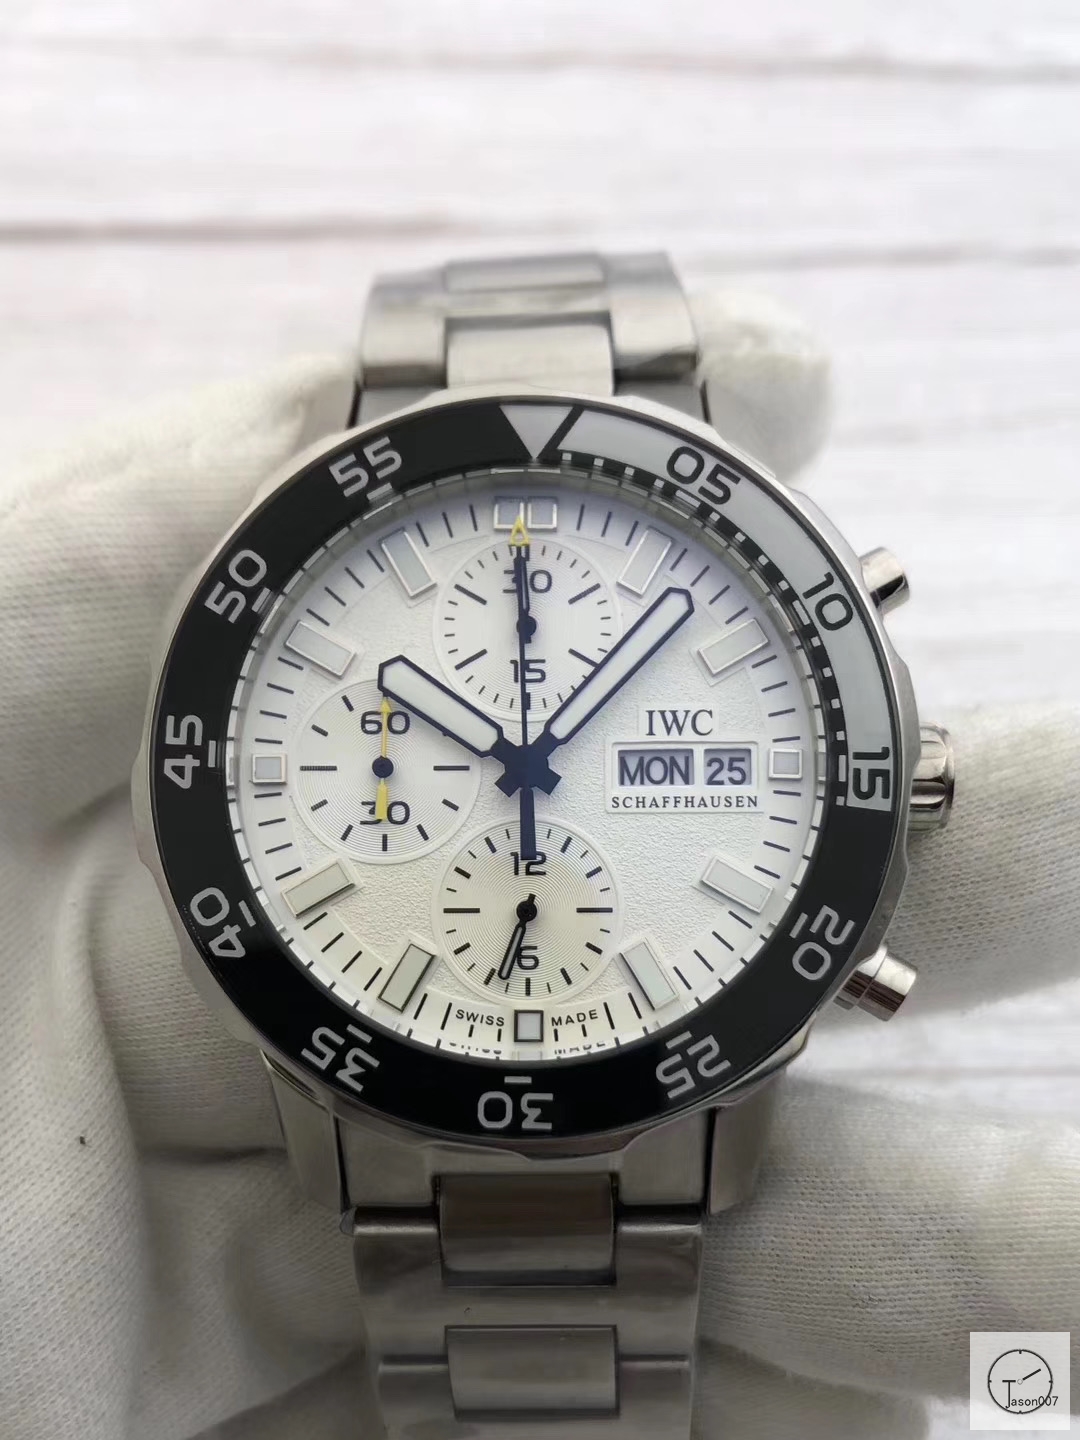 IWC Aquatimer Silver Dial Quartz Chronograph Black Yellow Day Date Mens Watch IW376701 Stainless Steel Strap Mens Wristwatches ICW22830560